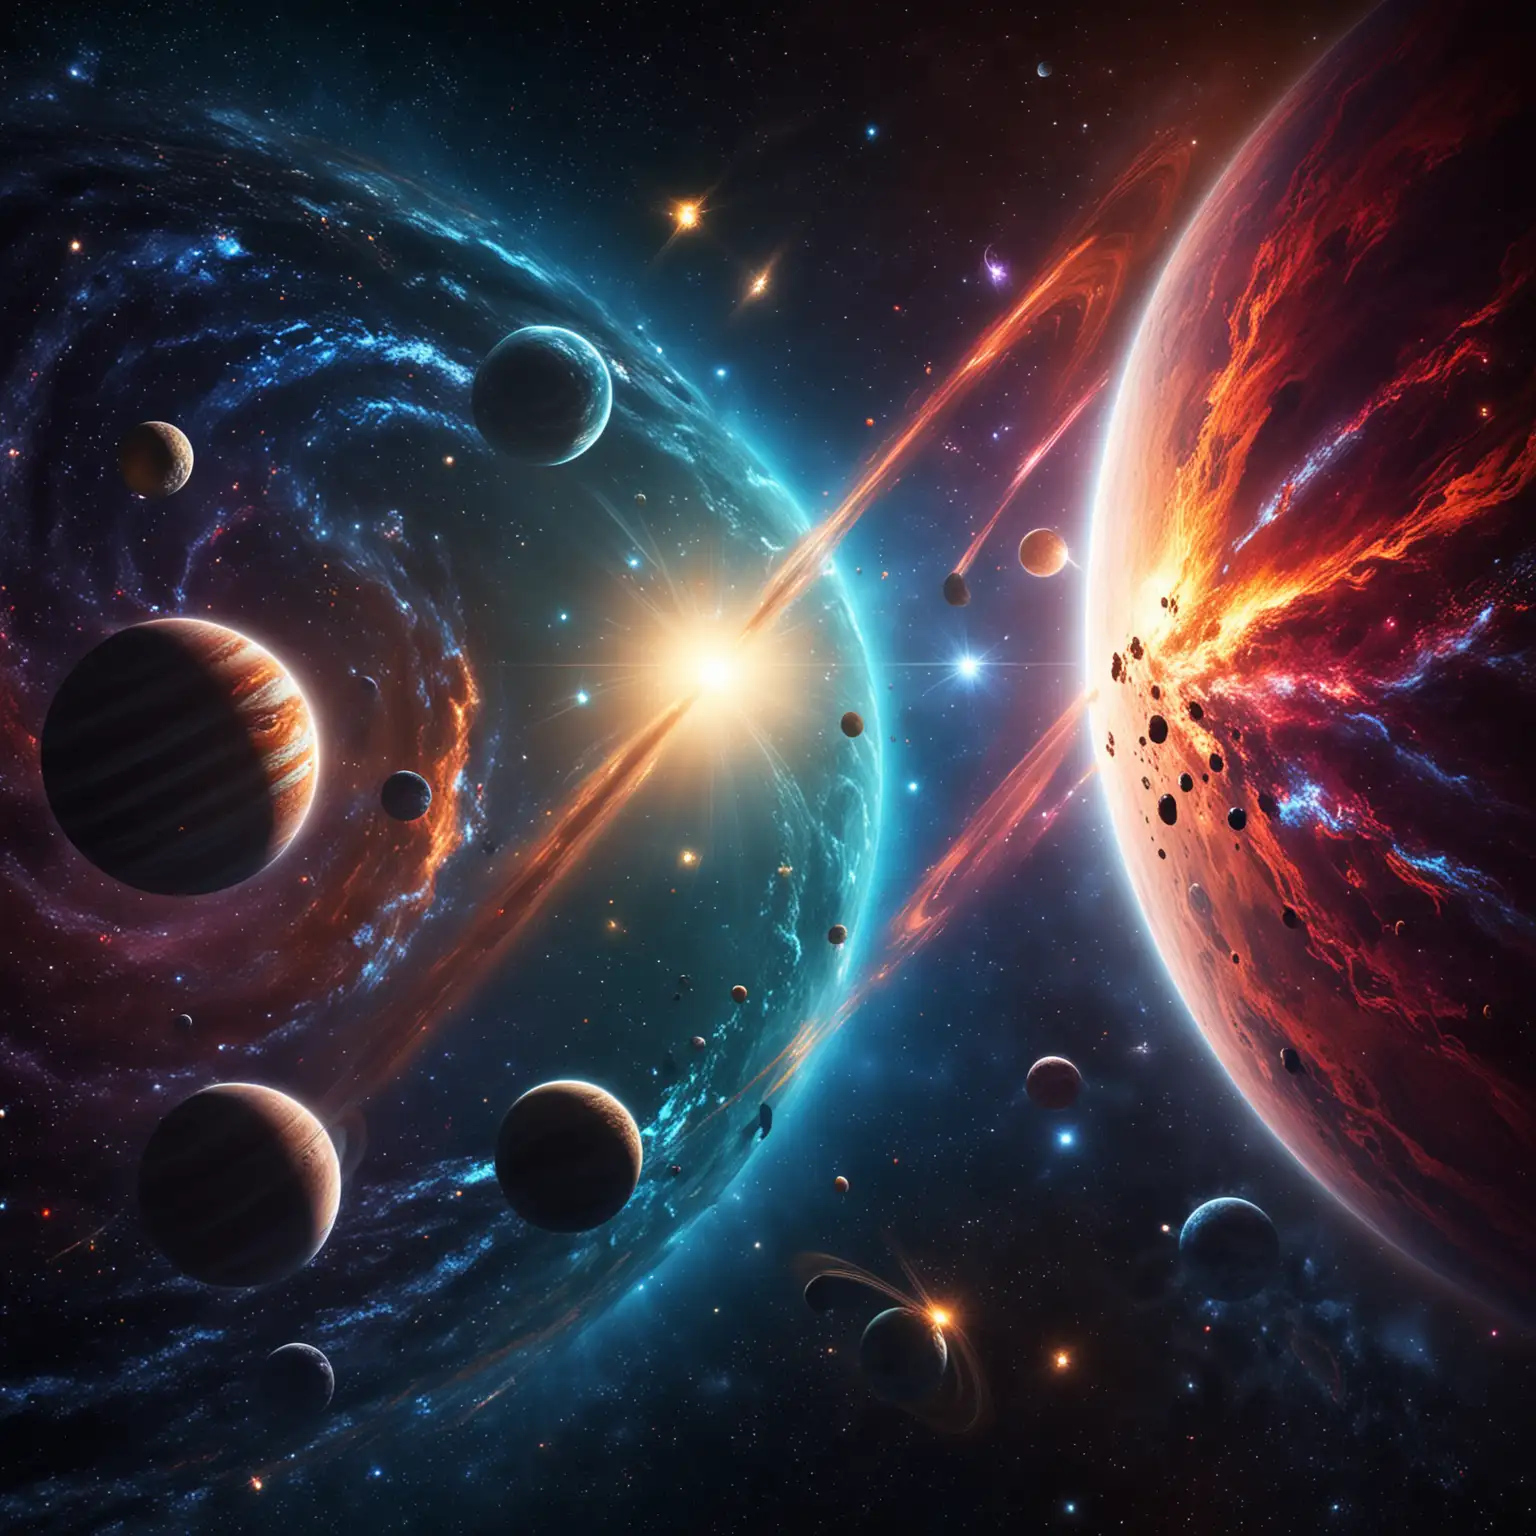 colorful space scene with planets, stars and galaxies